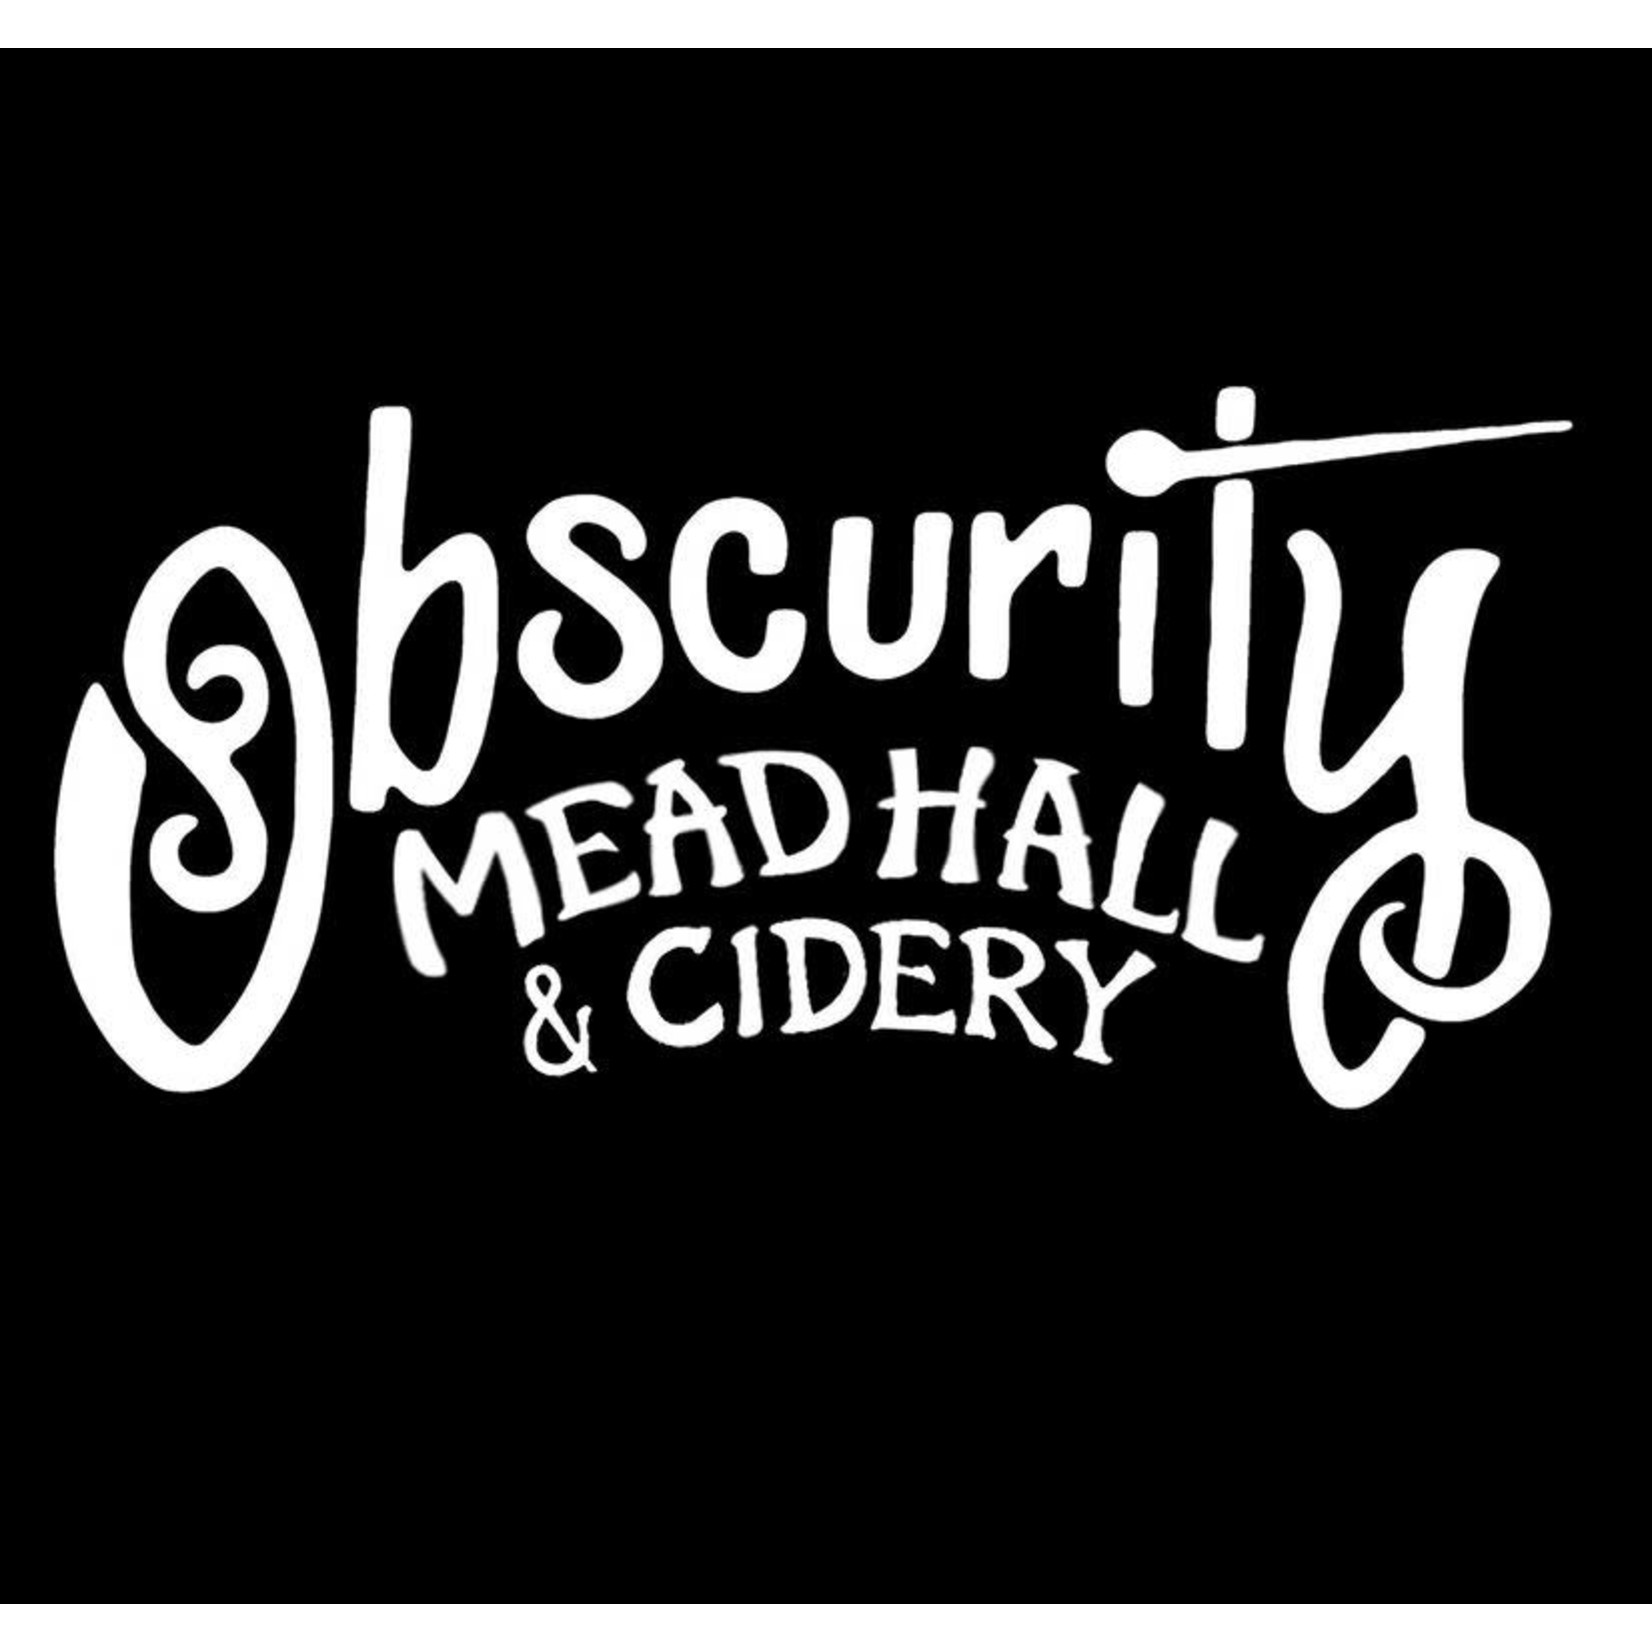 Obscurity Mead Hall & Cidery-Elburn Obscurity Mead Hall & Cidery-Elburn $15.00 General Certificate